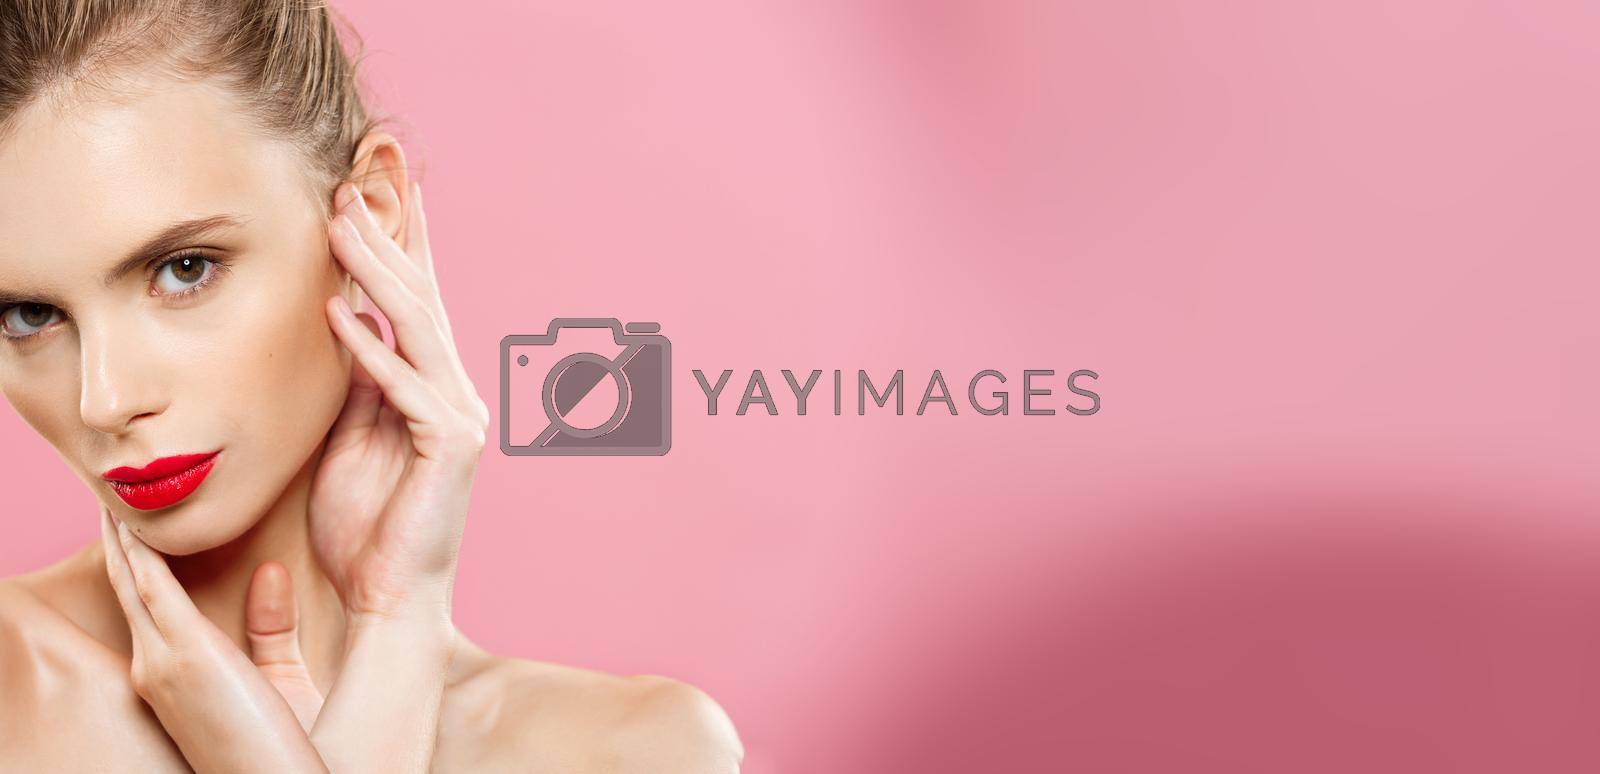 Beauty concept - Gorgeous Young Brunette Woman face portrait. Beauty Model Girl with bright eyebrows, perfect make-up, red lips, touching her face. Isolated on pink background